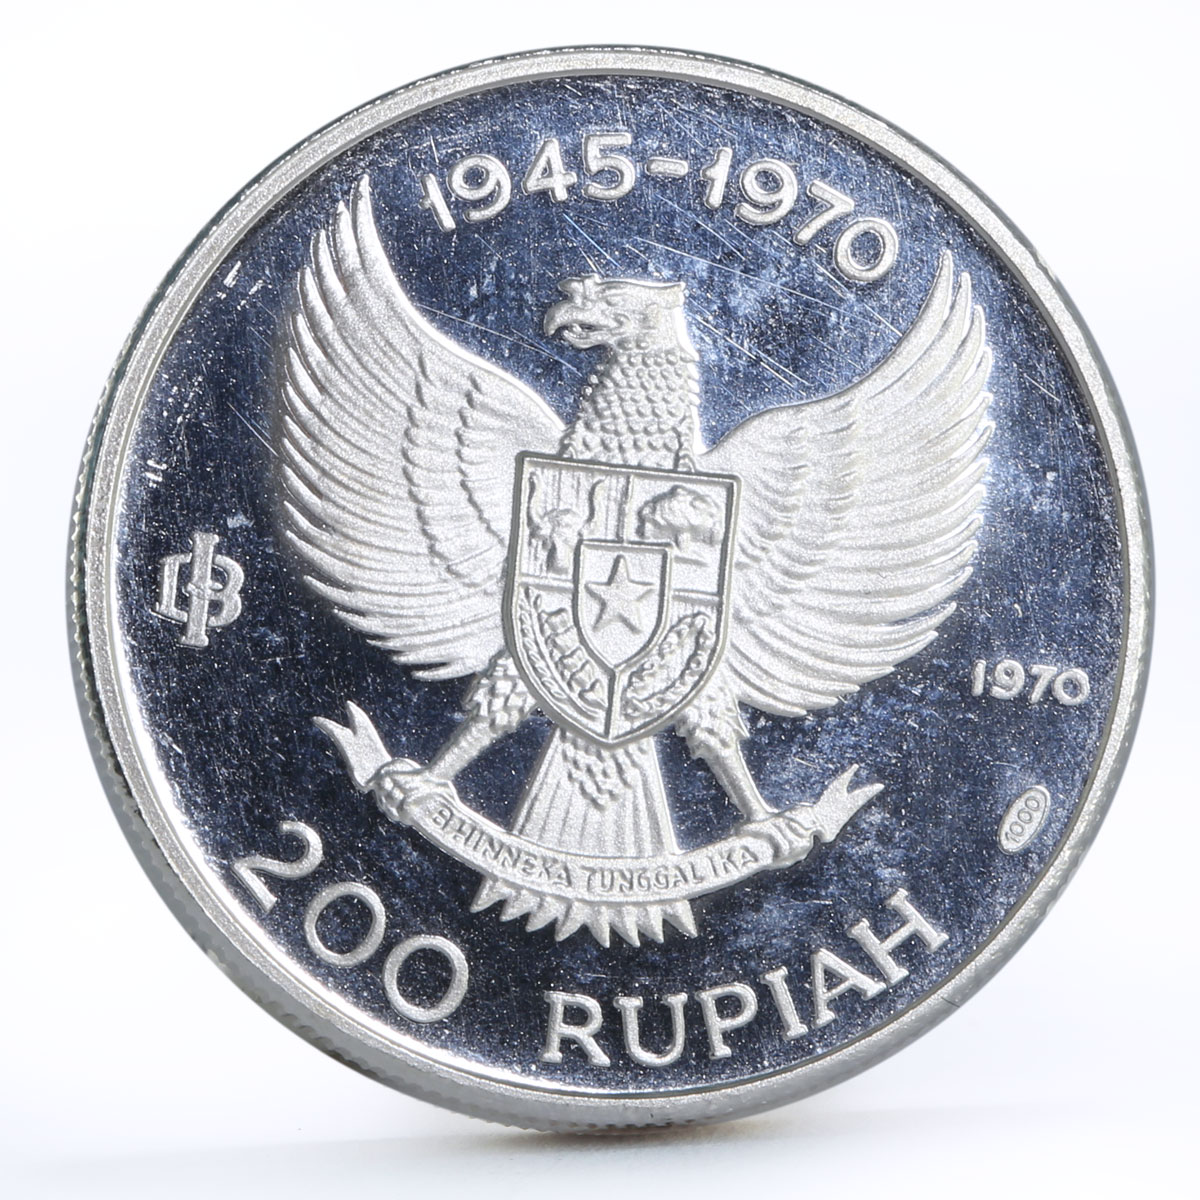 Indonesia 200 rupiah 25th Anniversary Independence Great Bird silver coin 1970